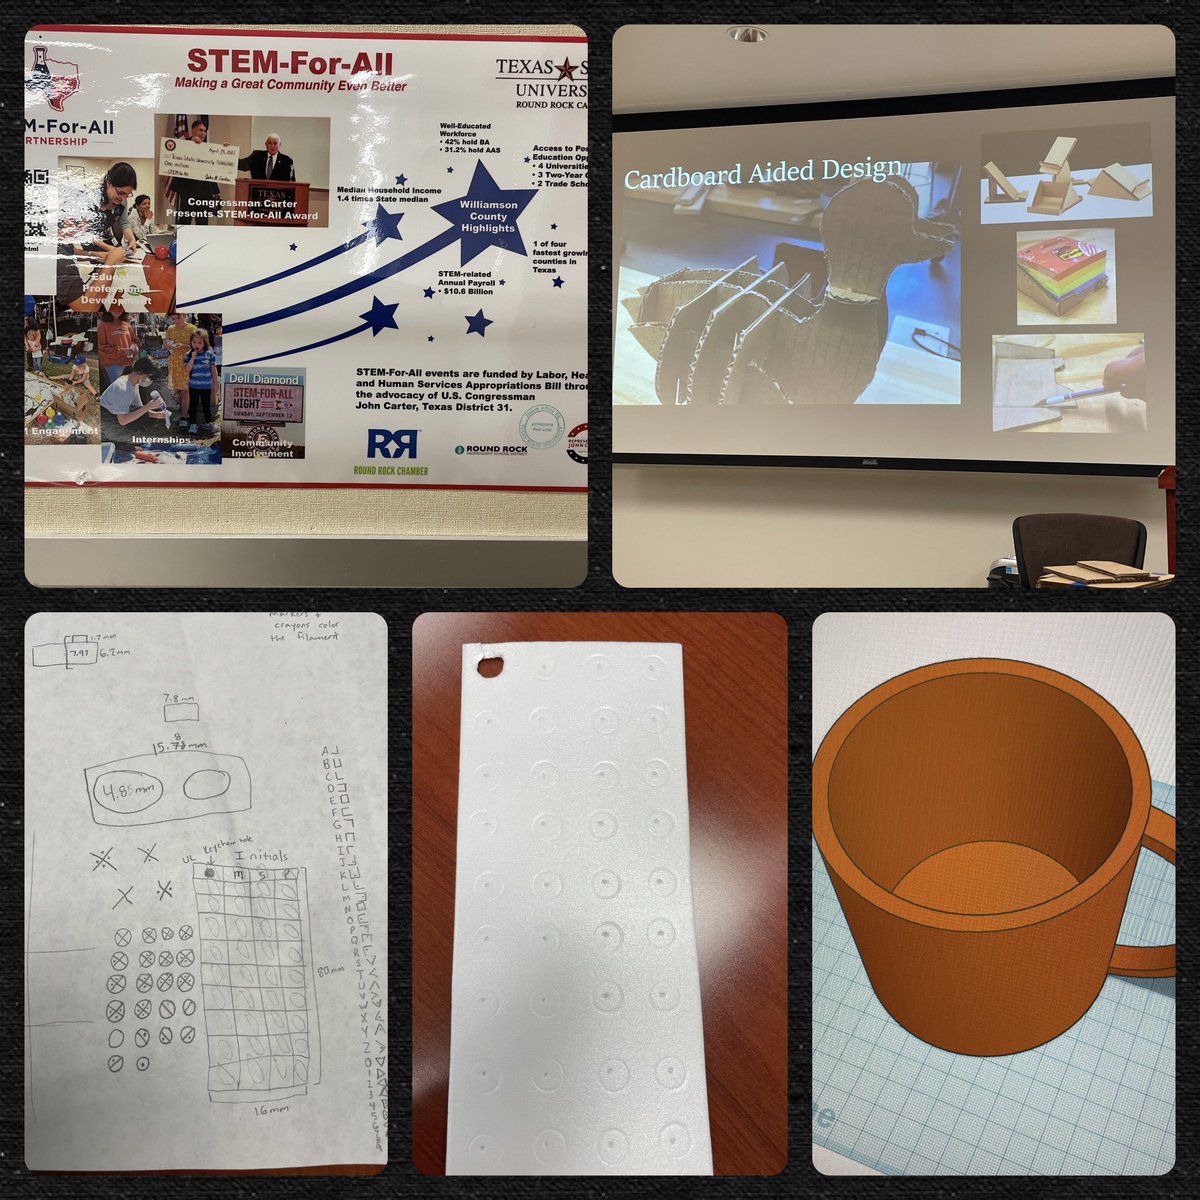 Thank you, @txstrrc for a great week of learning.  Day 3 of the STEM-for-All was hands on and I built great connections with people even if my prototype’s connection broke.  🤪